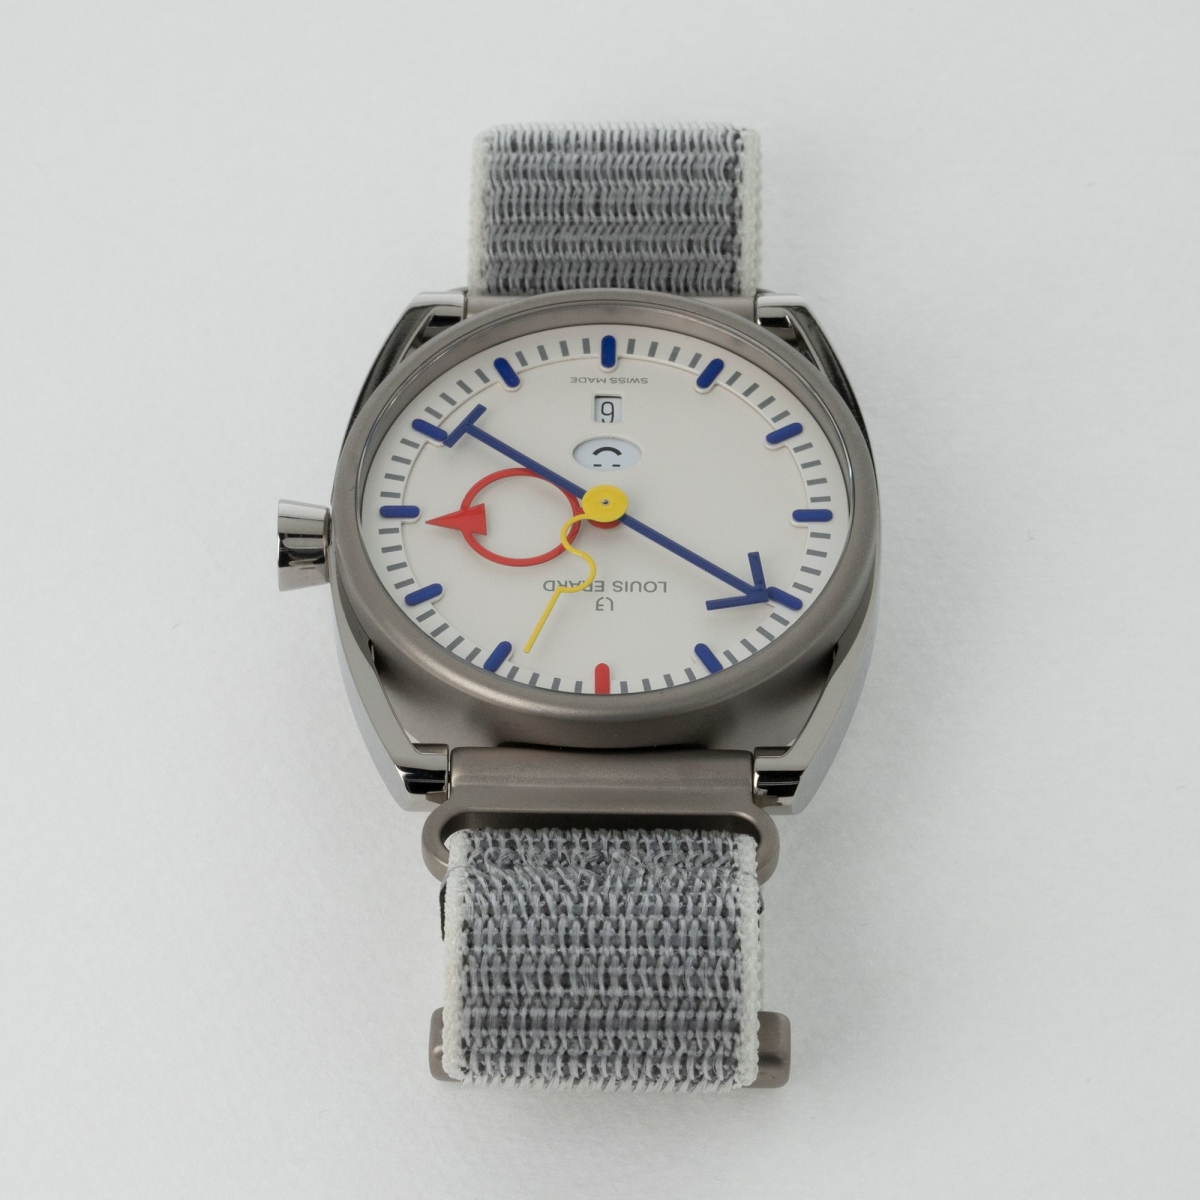 La Seamine Blanche x Alain Silberstein Excellence Limited Edition